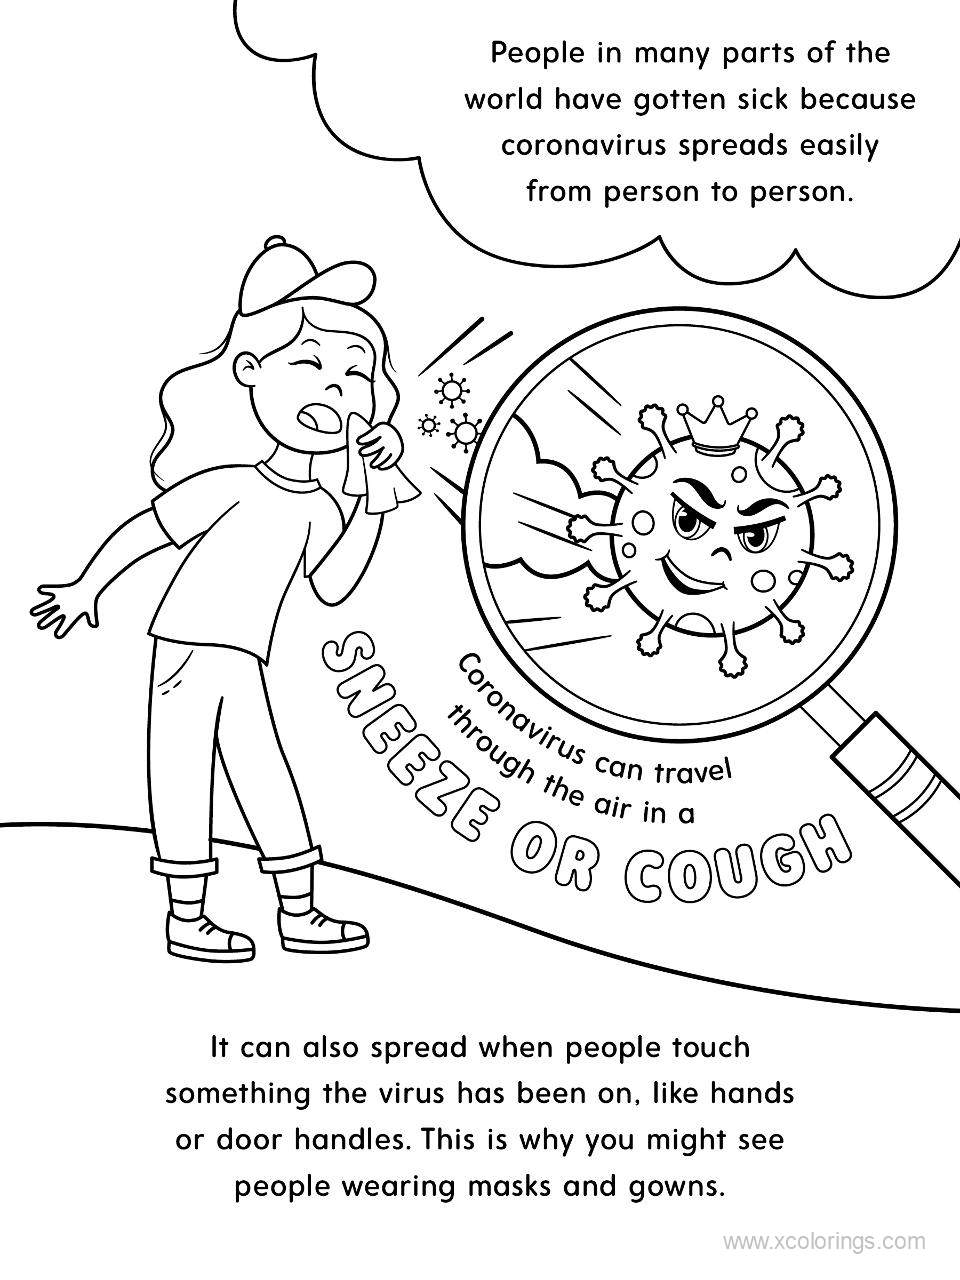 Free Coronavirus Tips Coloring Pages printable